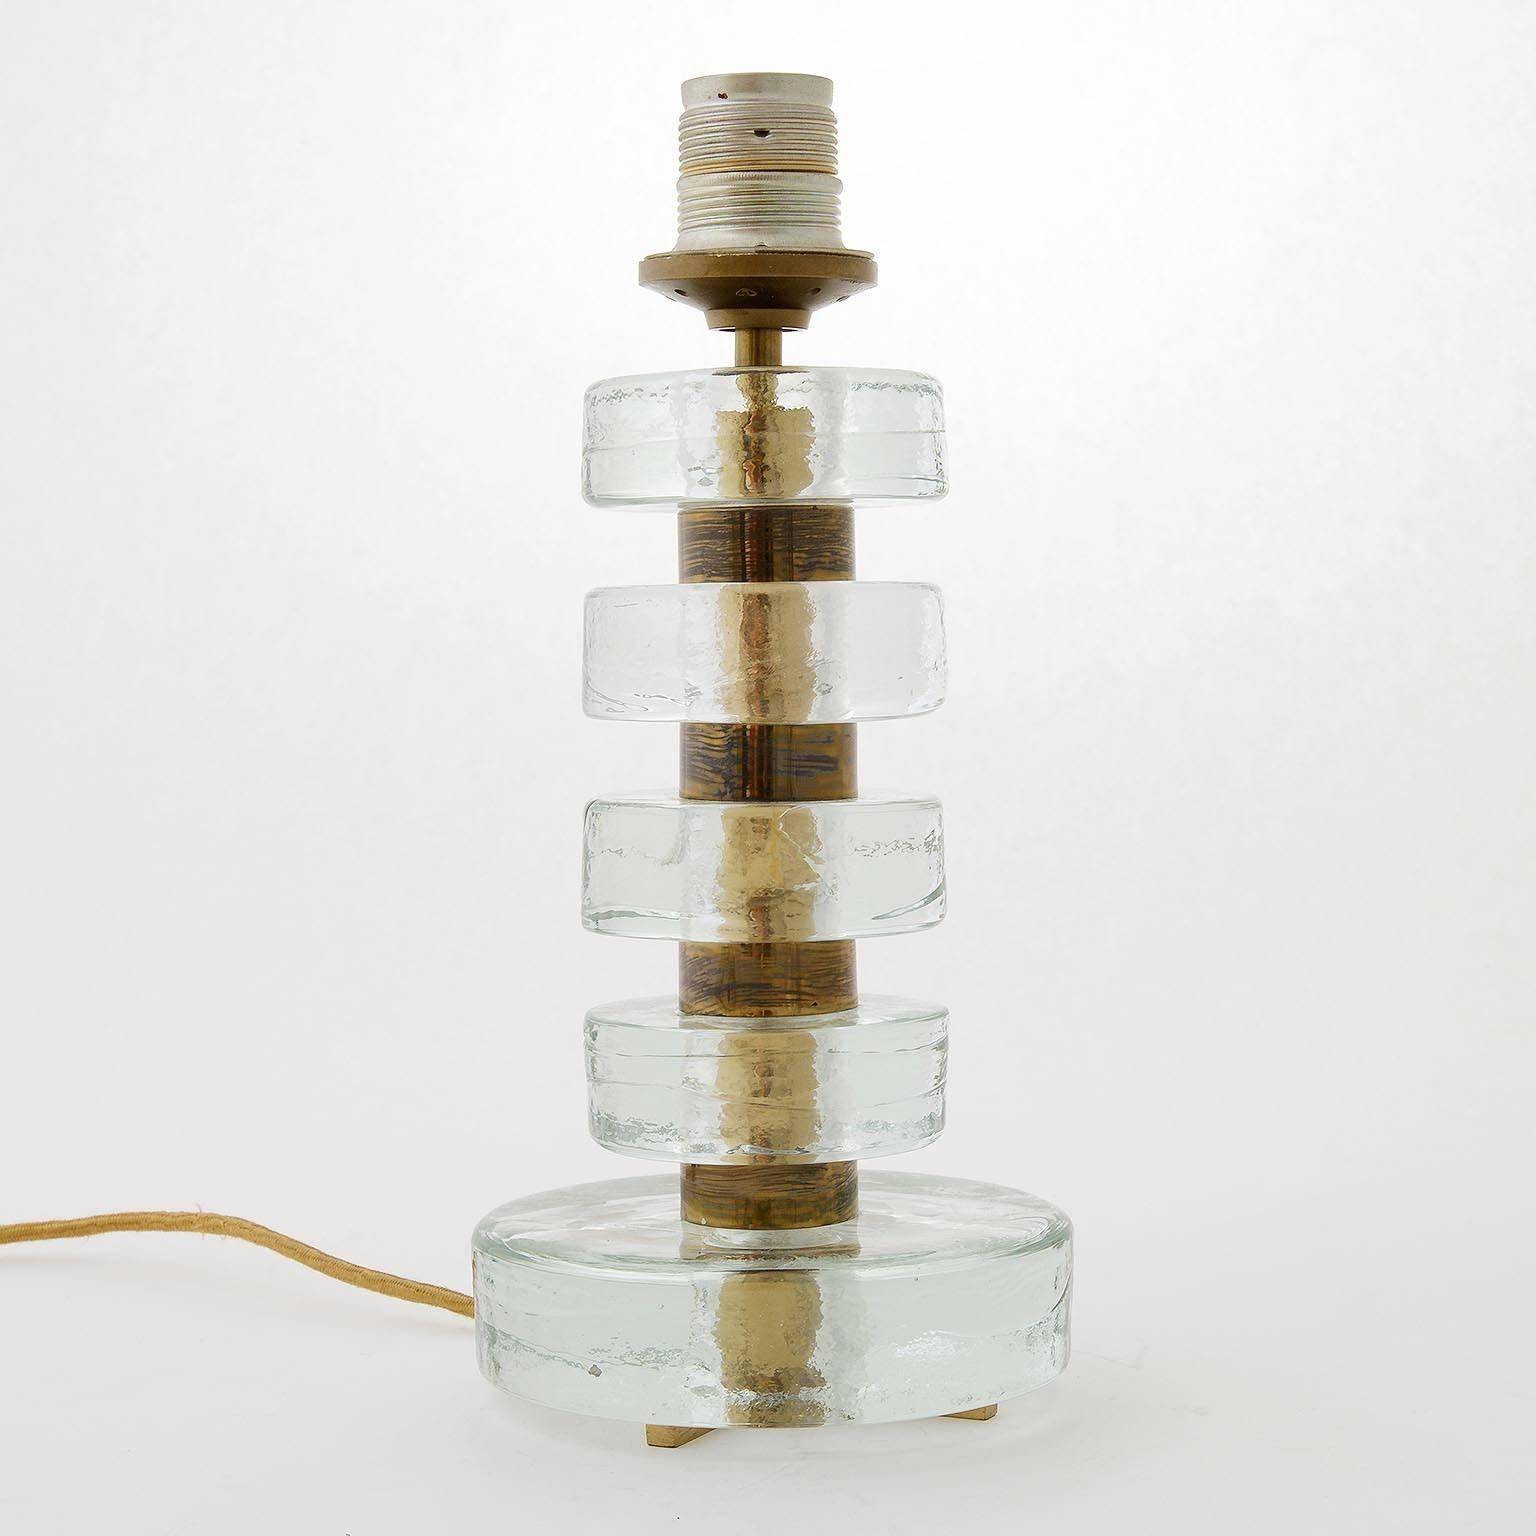 A high quality table light by Bakalowits & Söhne, Vienna, manufactured in midcentury, circa 1960. The stand is made of thick round pieces of frosted glass stacked with brass spaces. The stand is in original condition with great patina on brass. The